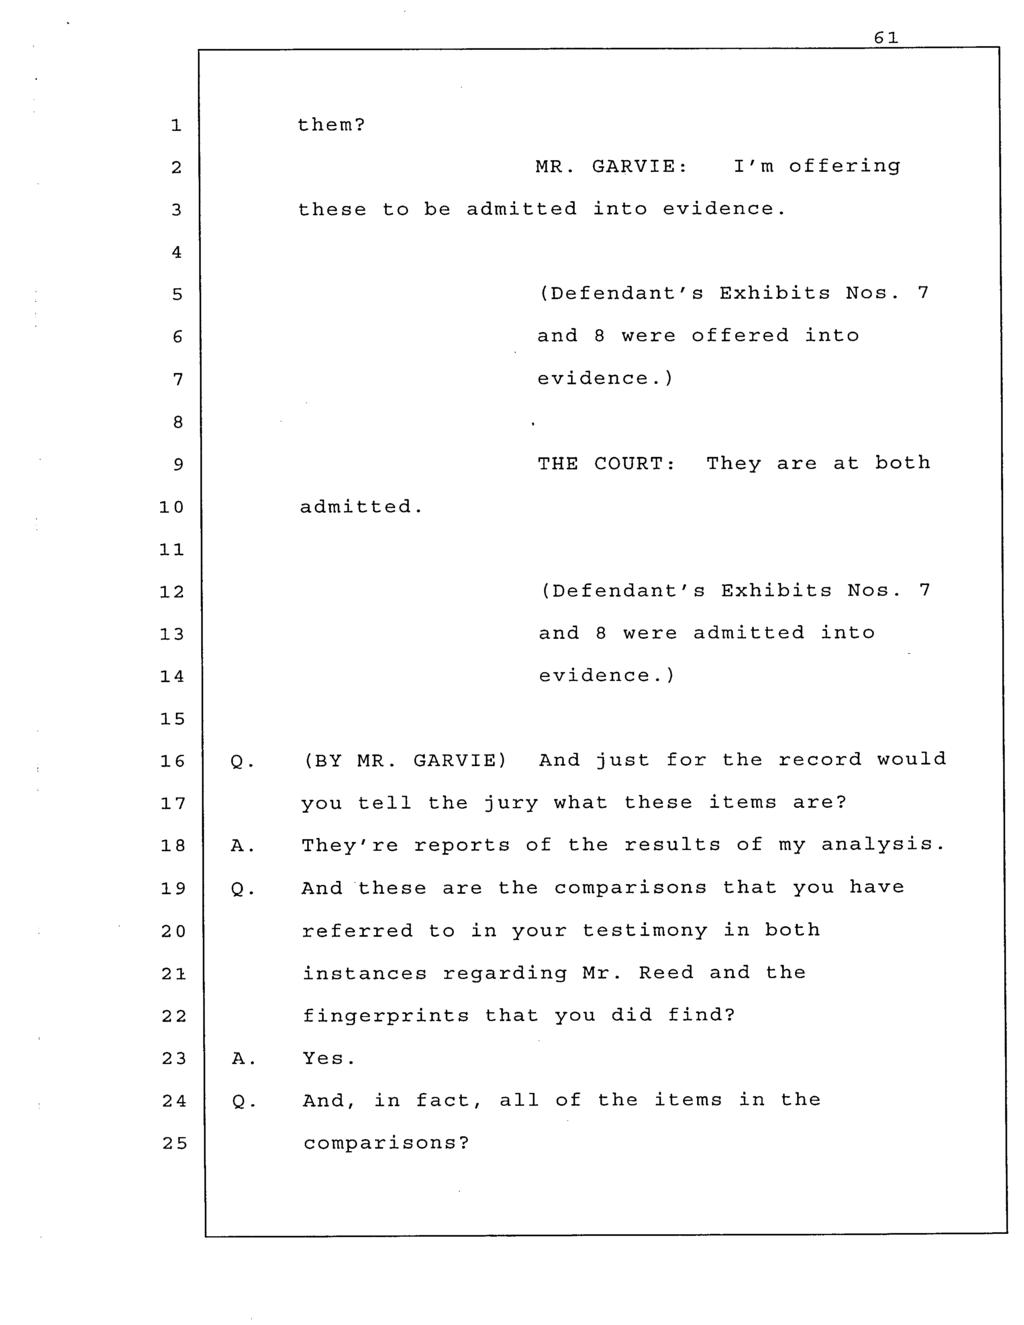 them? MR. GARVIE: I'm offering these to be admitted into evidence. (Defendant's Exhibits Nos. and were offered into evidence.) THE COURT: They are at both 0 admitted. (Defendant's Exhibits Nos. and were admitted into evidence.